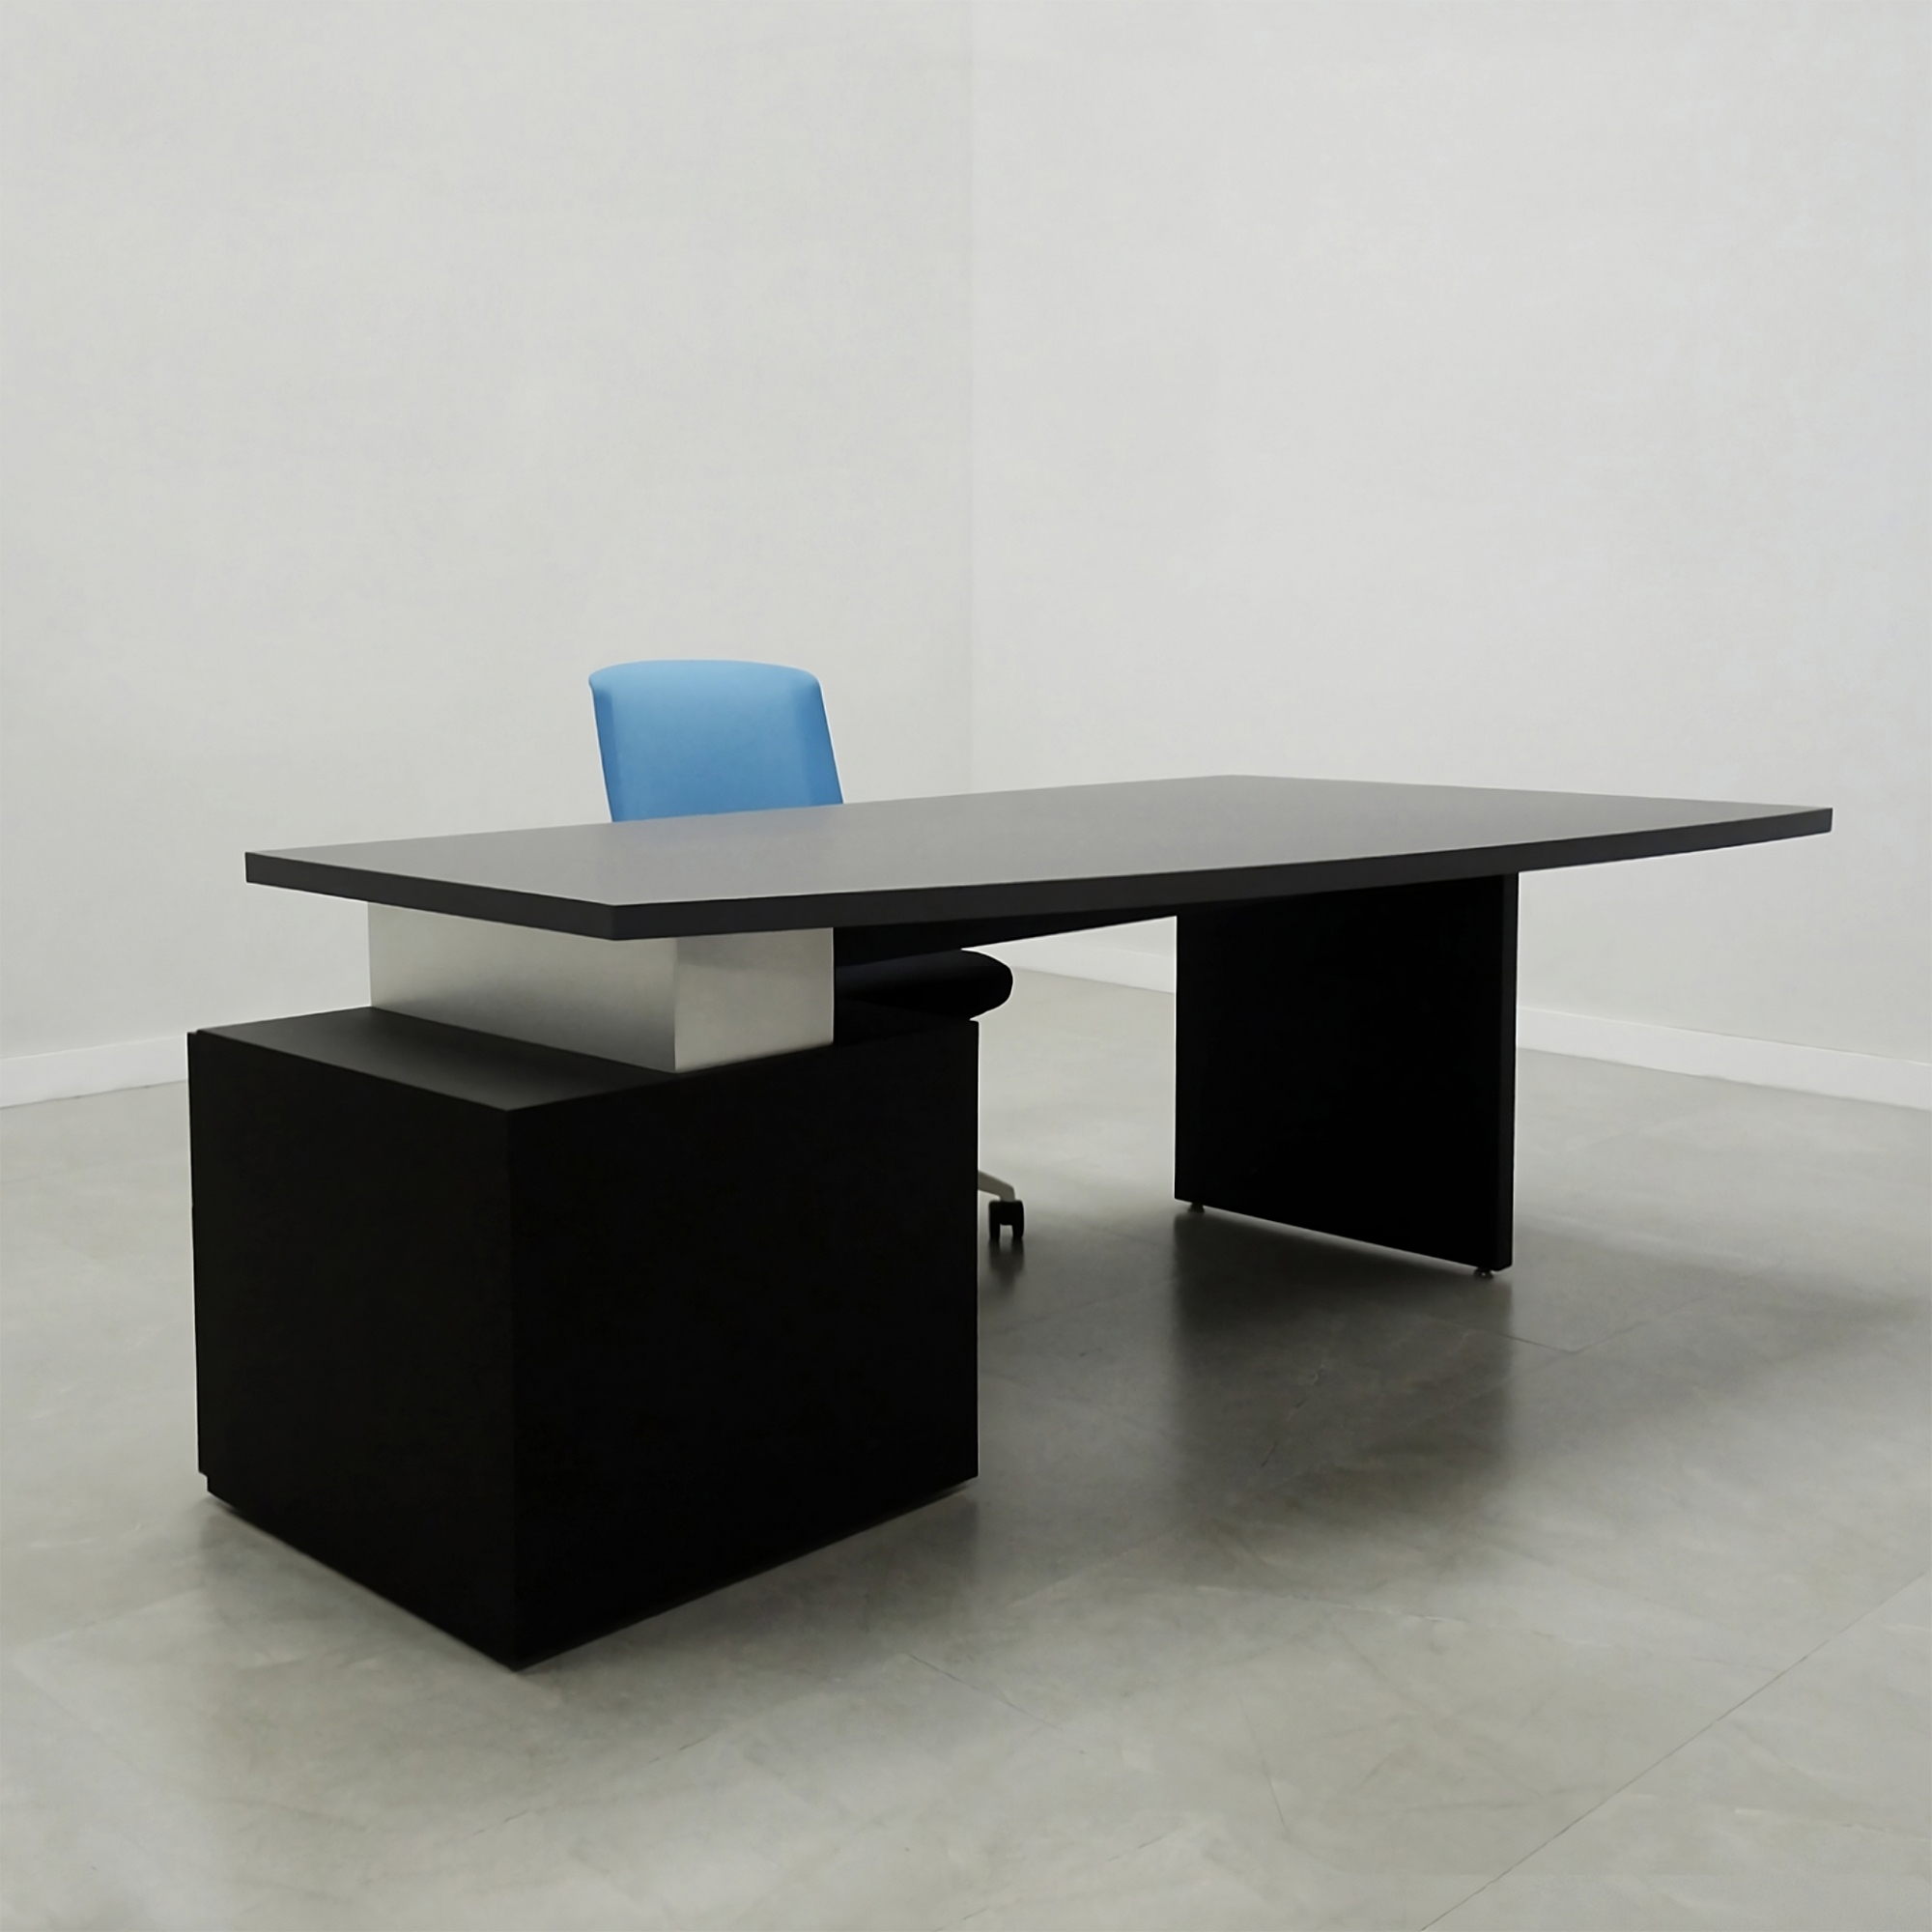 Avenue Curved Executive Desk With Laminate Top in black matte laminate top, base and storage shown here.